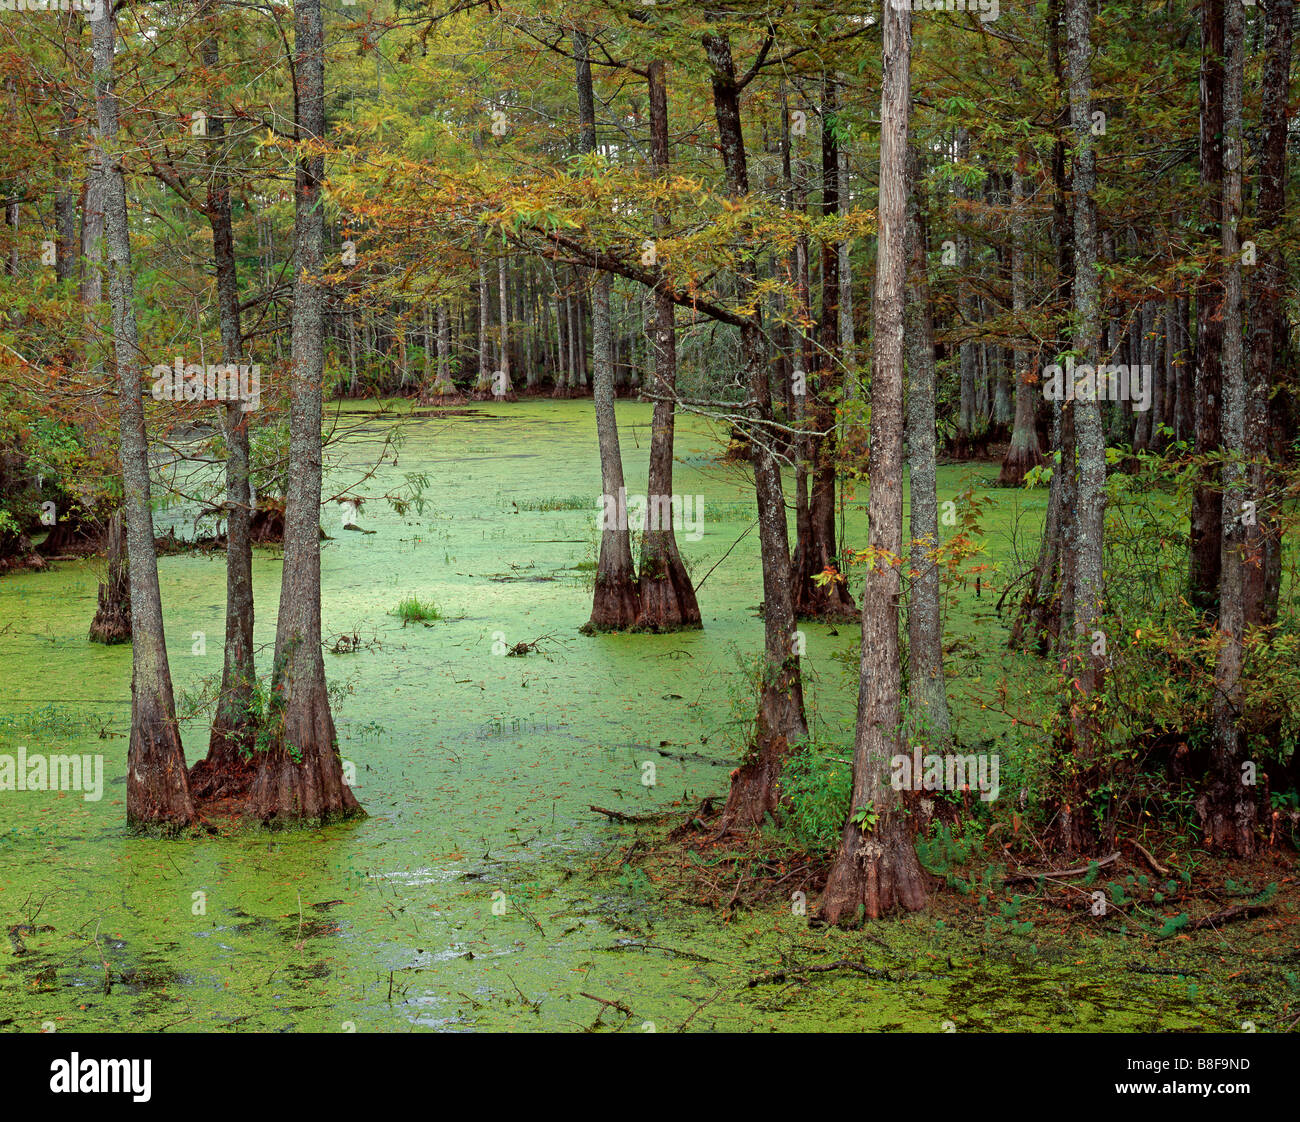 NORTH CAROLINA - Forest and bald cypress swamp at Merchants Millpond State Park. Stock Photo